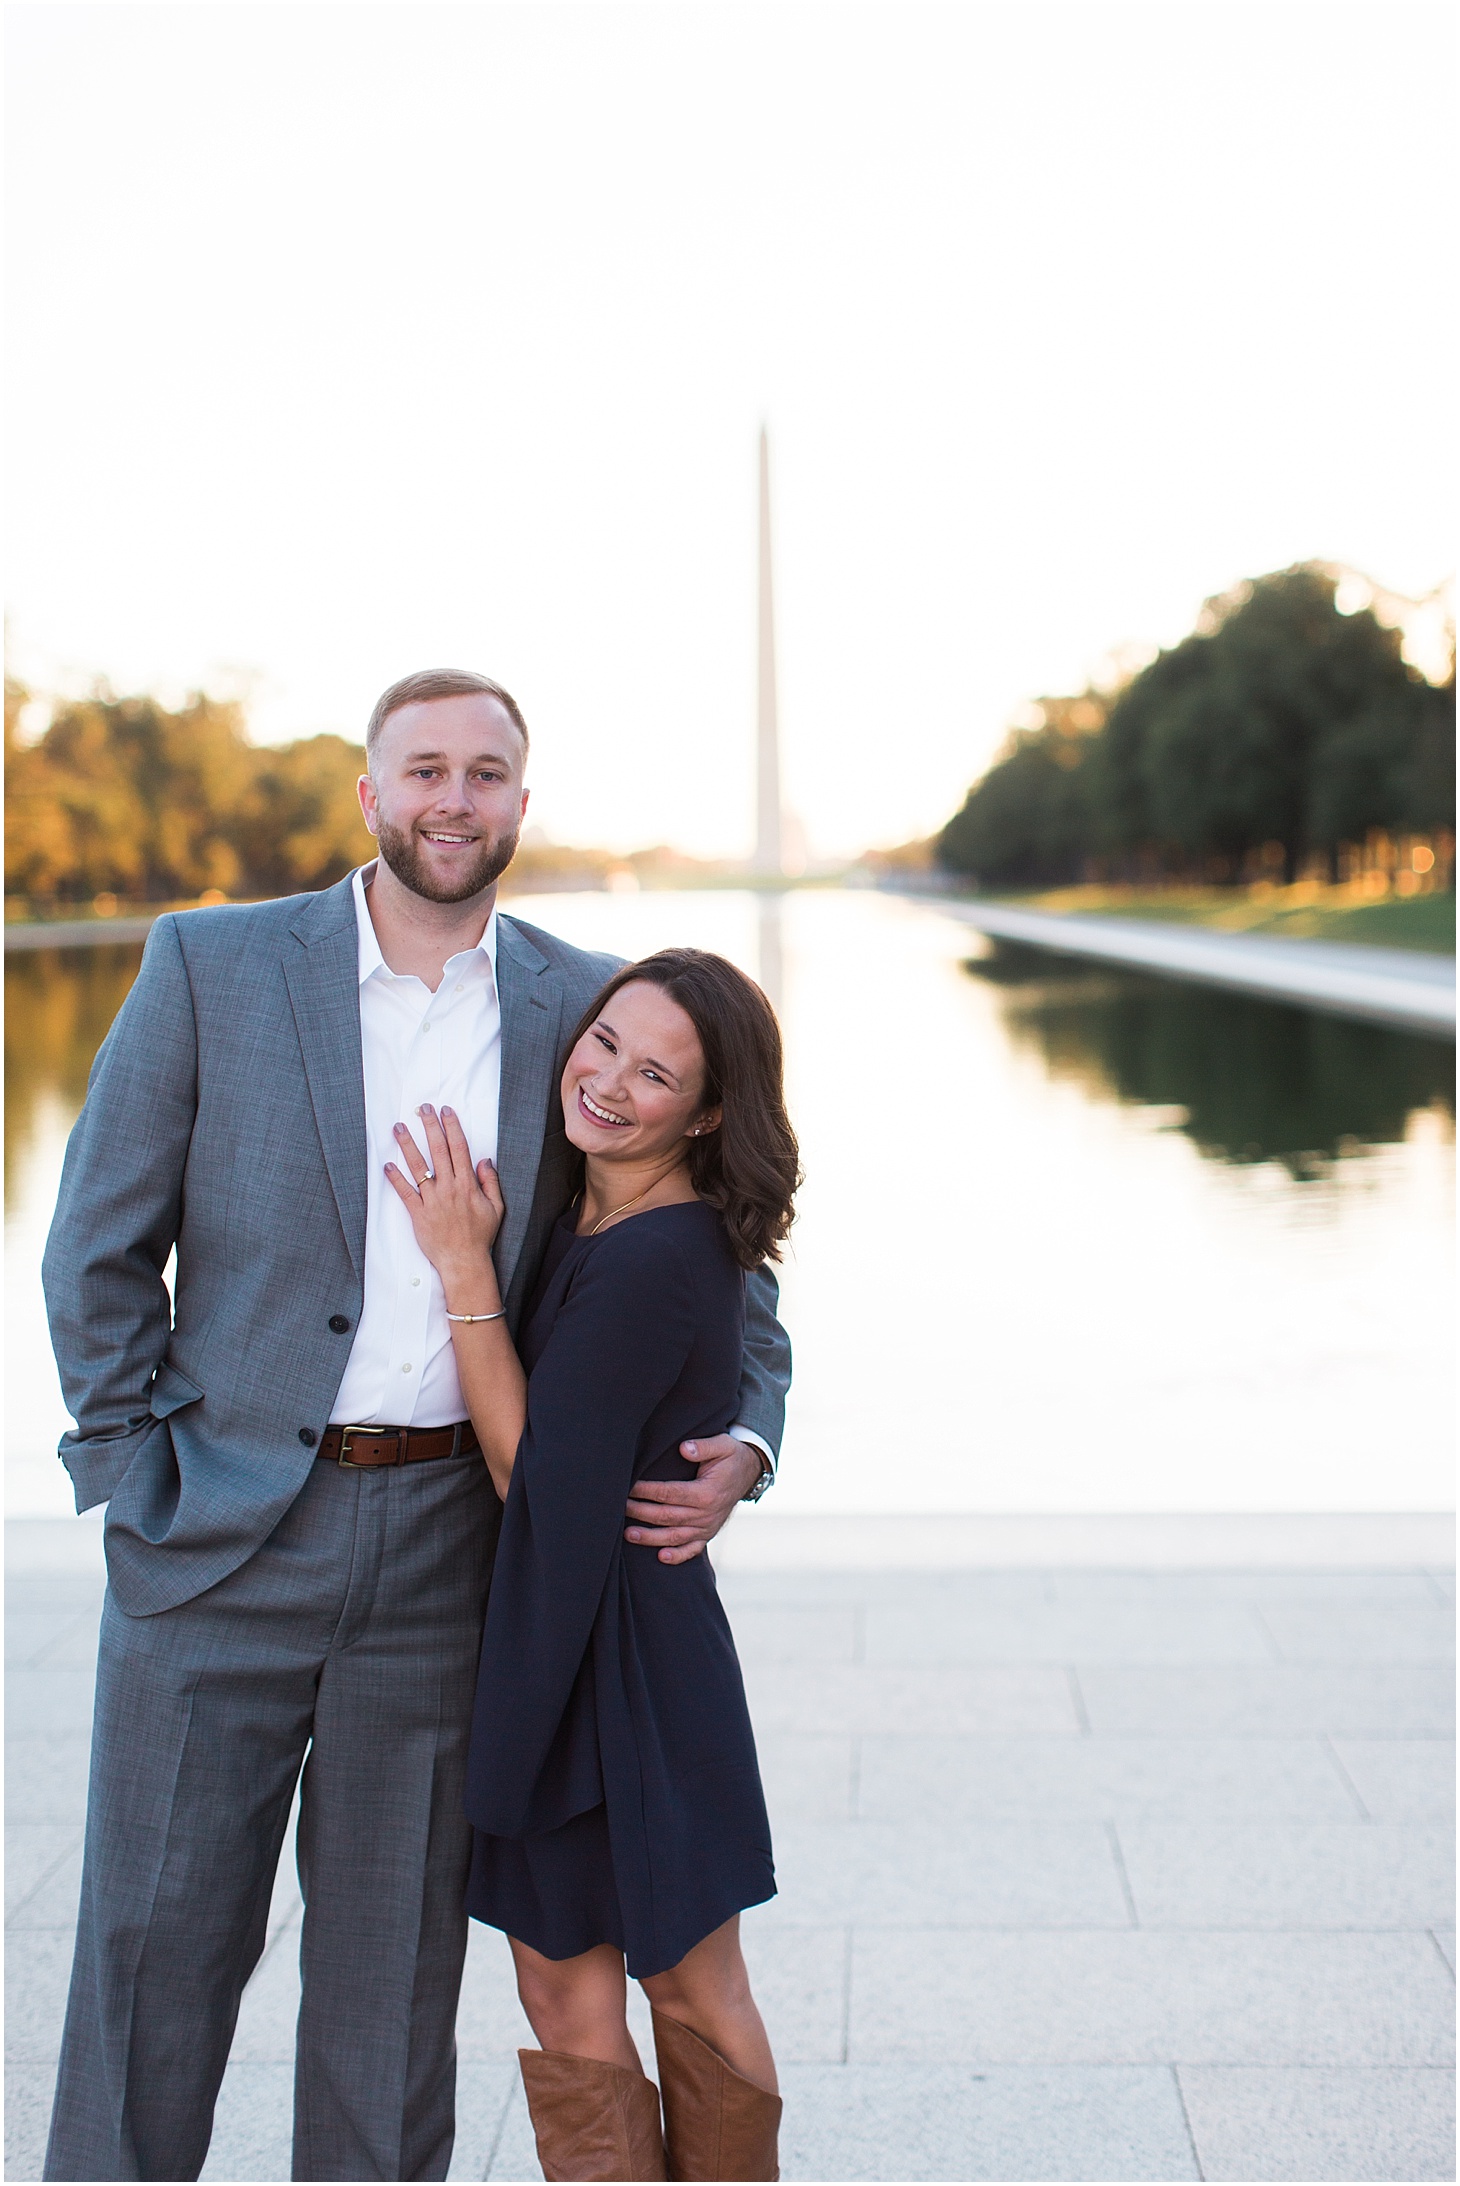 Engagement Portraits at the Lincoln Memorial Reflecting Pool | Sunrise Engagement Session in Old Town Alexandria | Sarah Bradshaw Photography